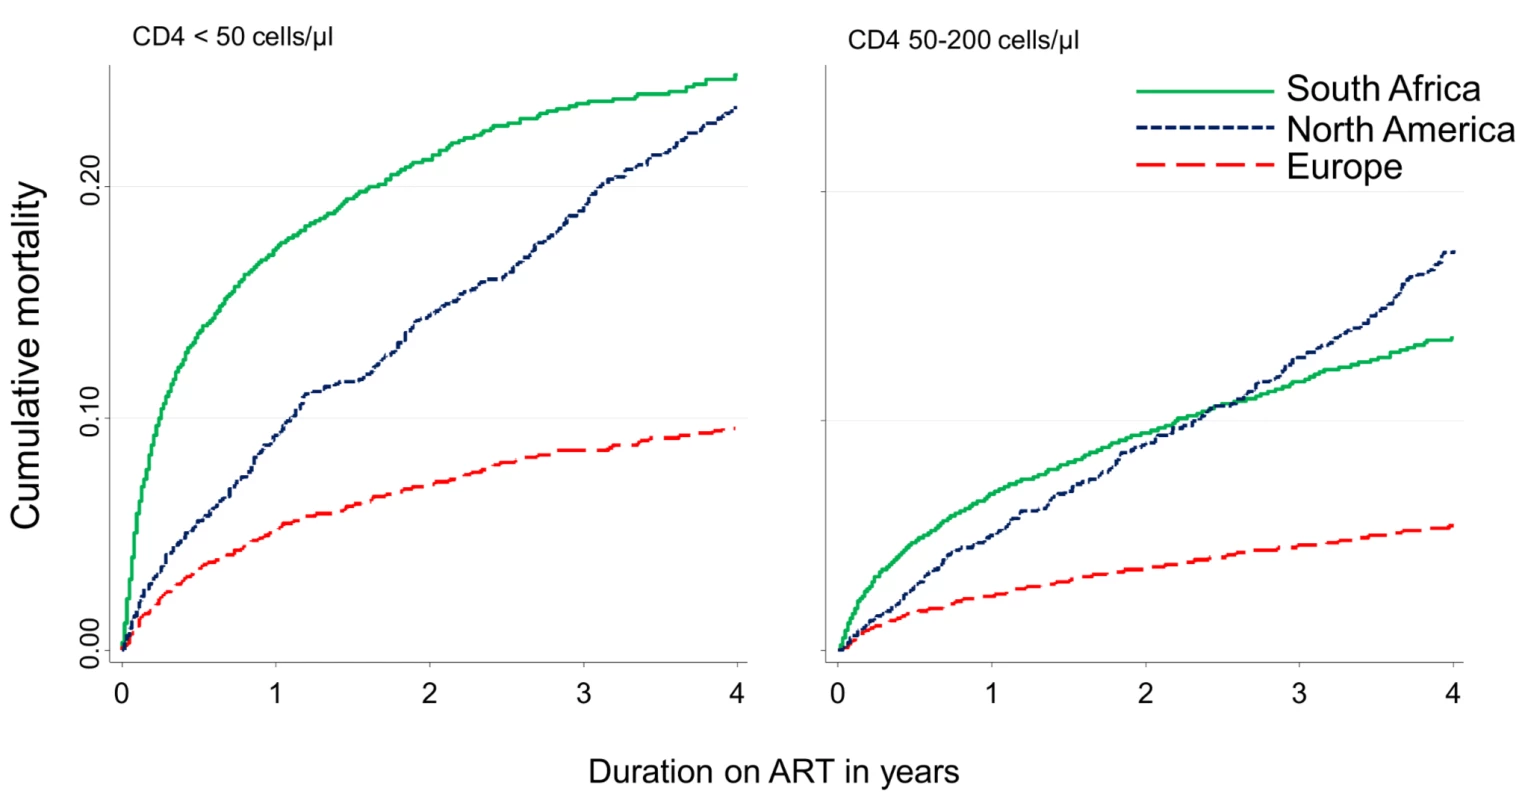 Cumulative incidence of mortality up to four years after start of ART by region and CD4 count at ART initiation, corrected in South Africa for mortality under-ascertainment.